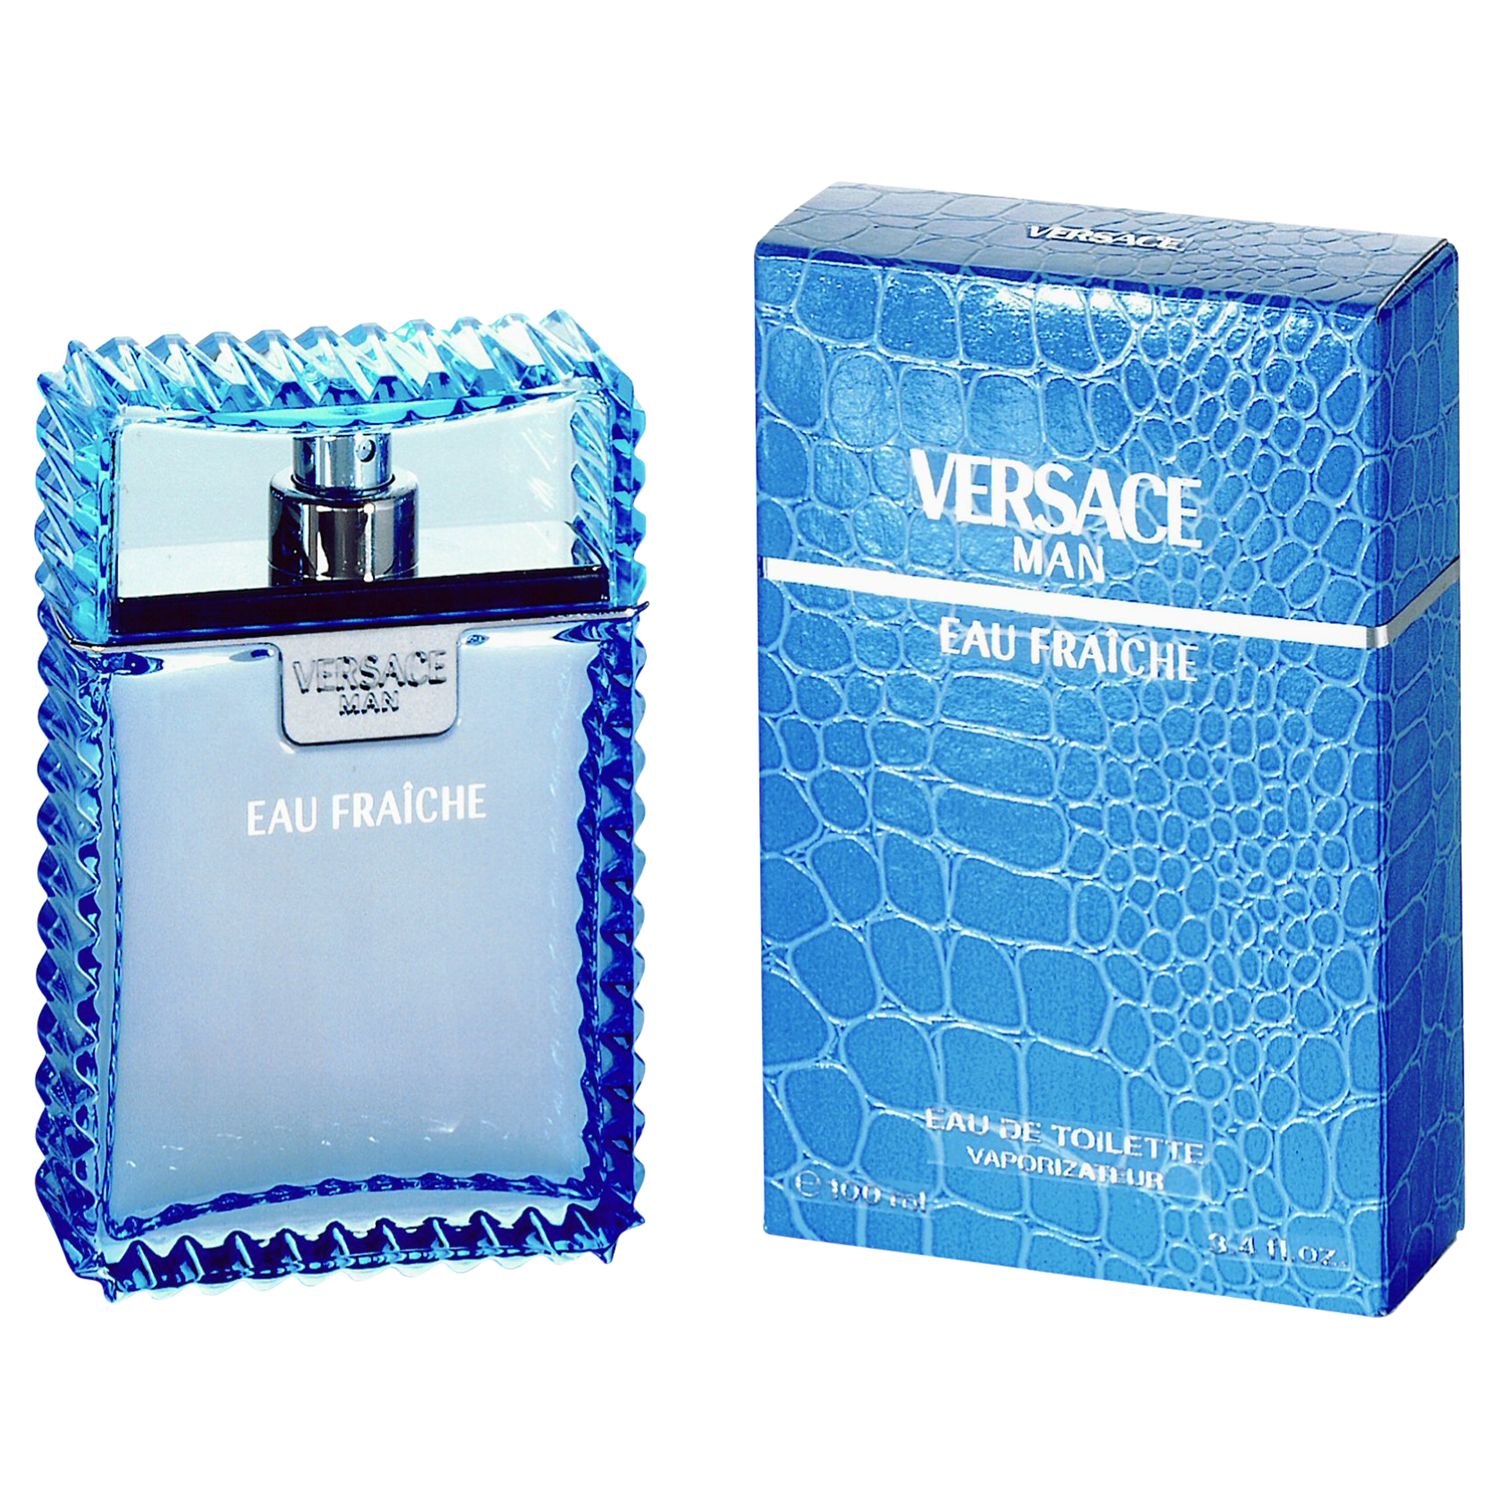 versace mens aftershave 100ml